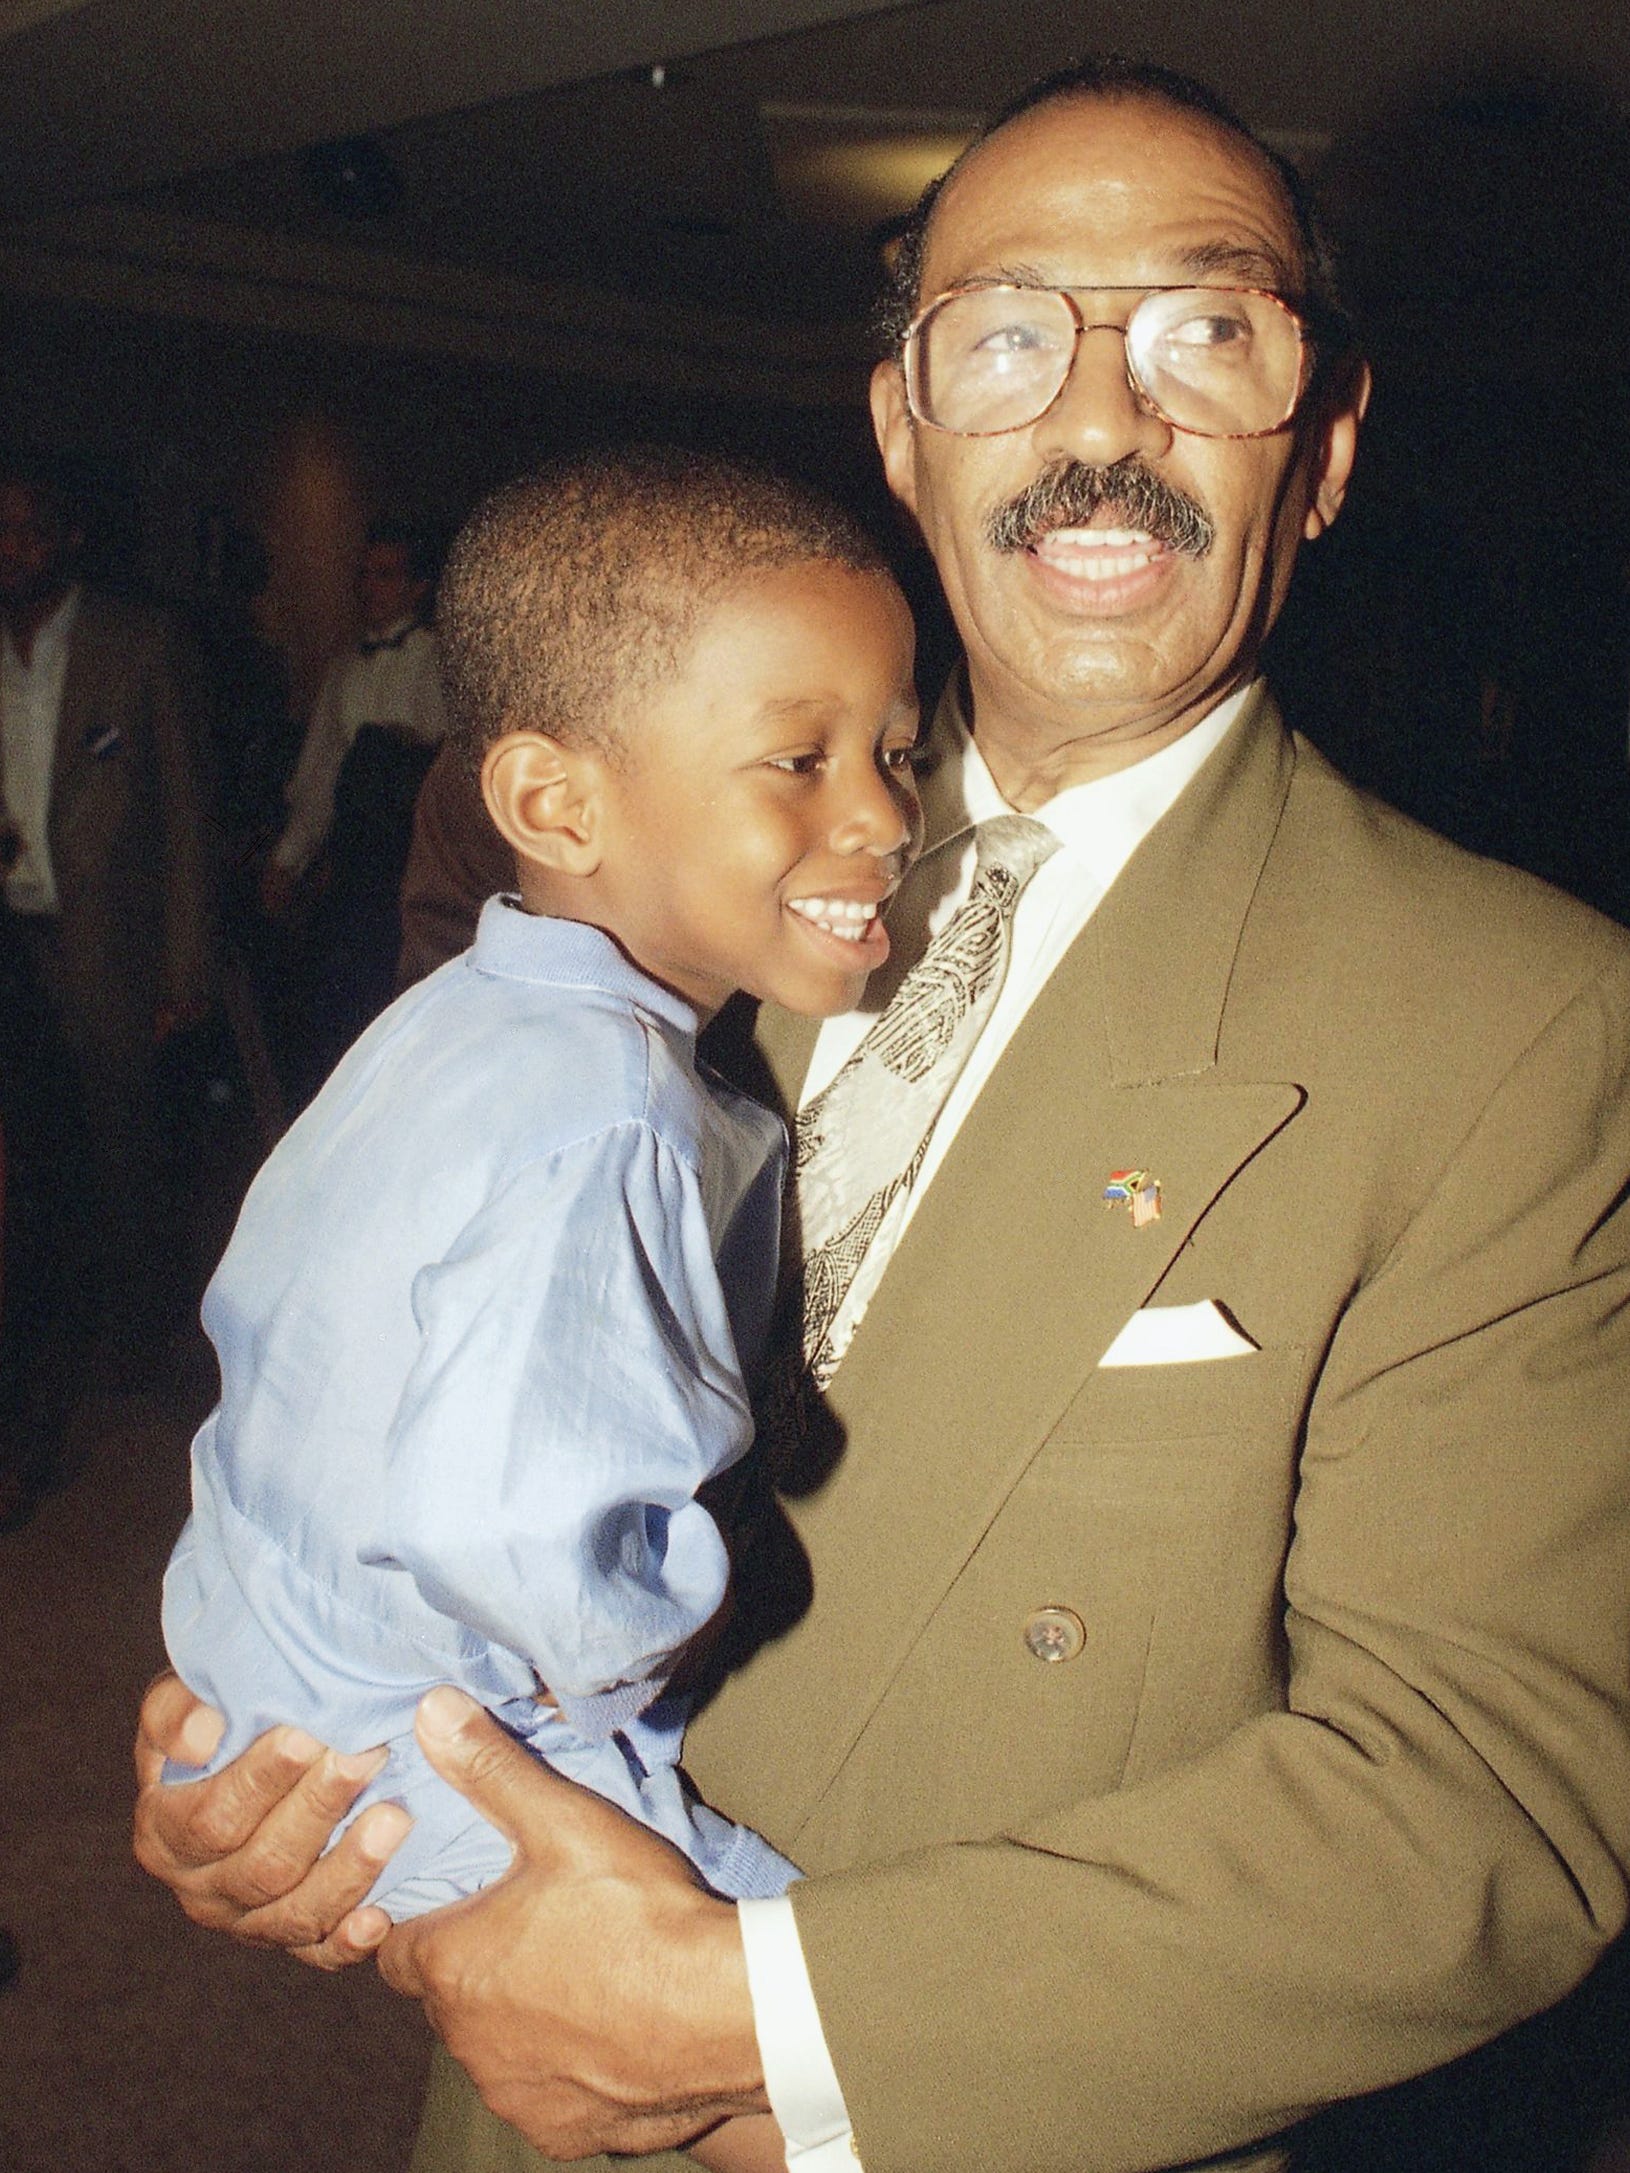 Conyers holds his son, John Conyers III, during his campaign primary victory party in 1994 in Detroit.